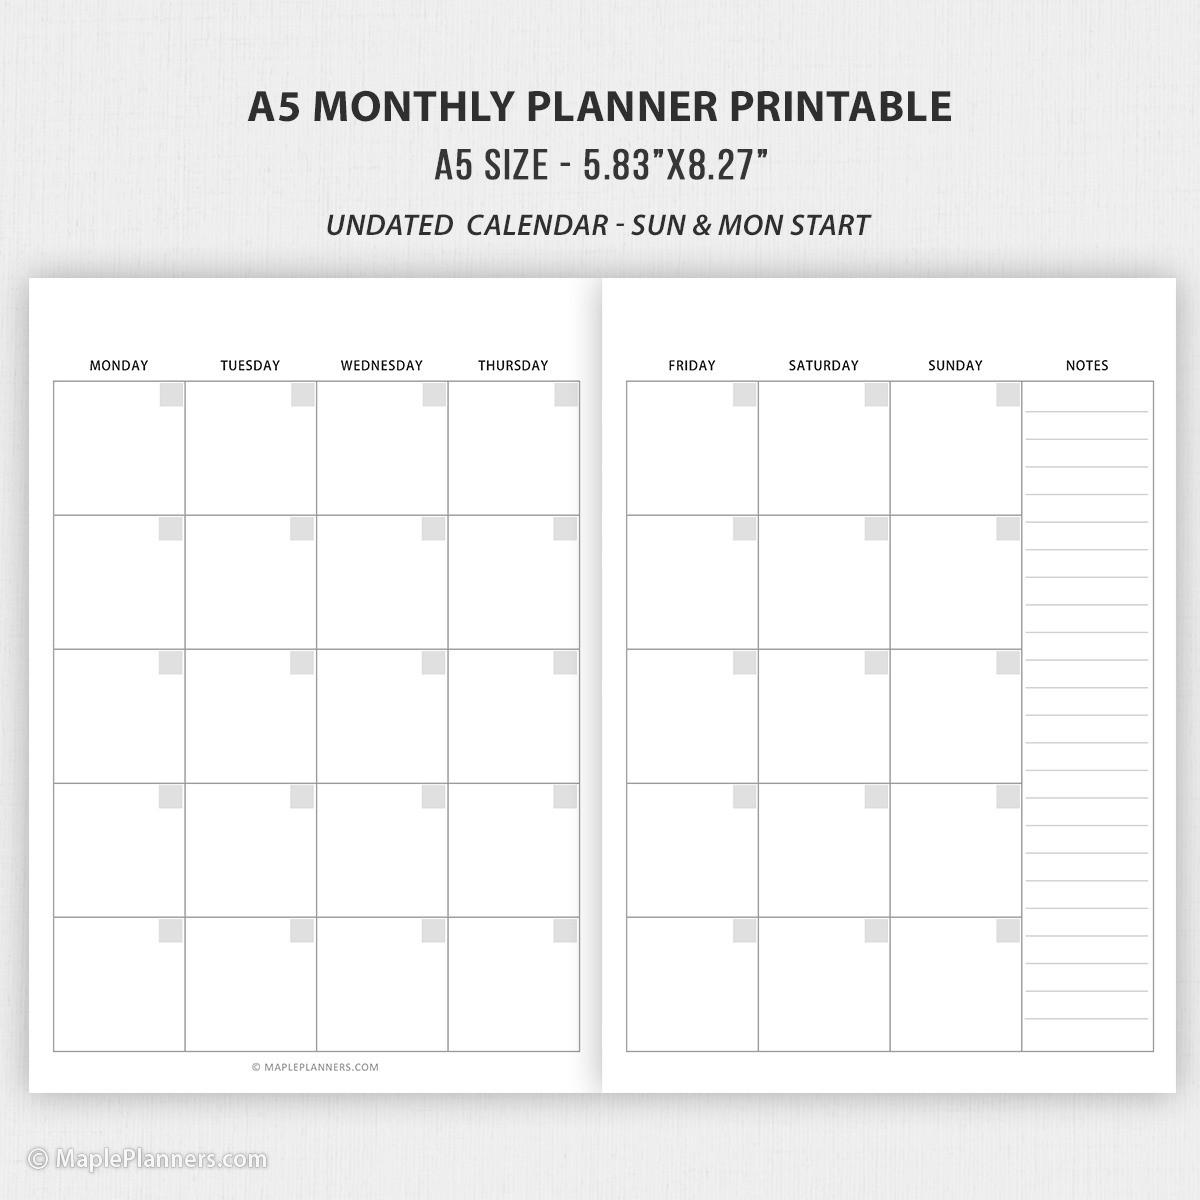 a5-planner-printable-inserts-a5-weekly-and-monthly-planner-inserts